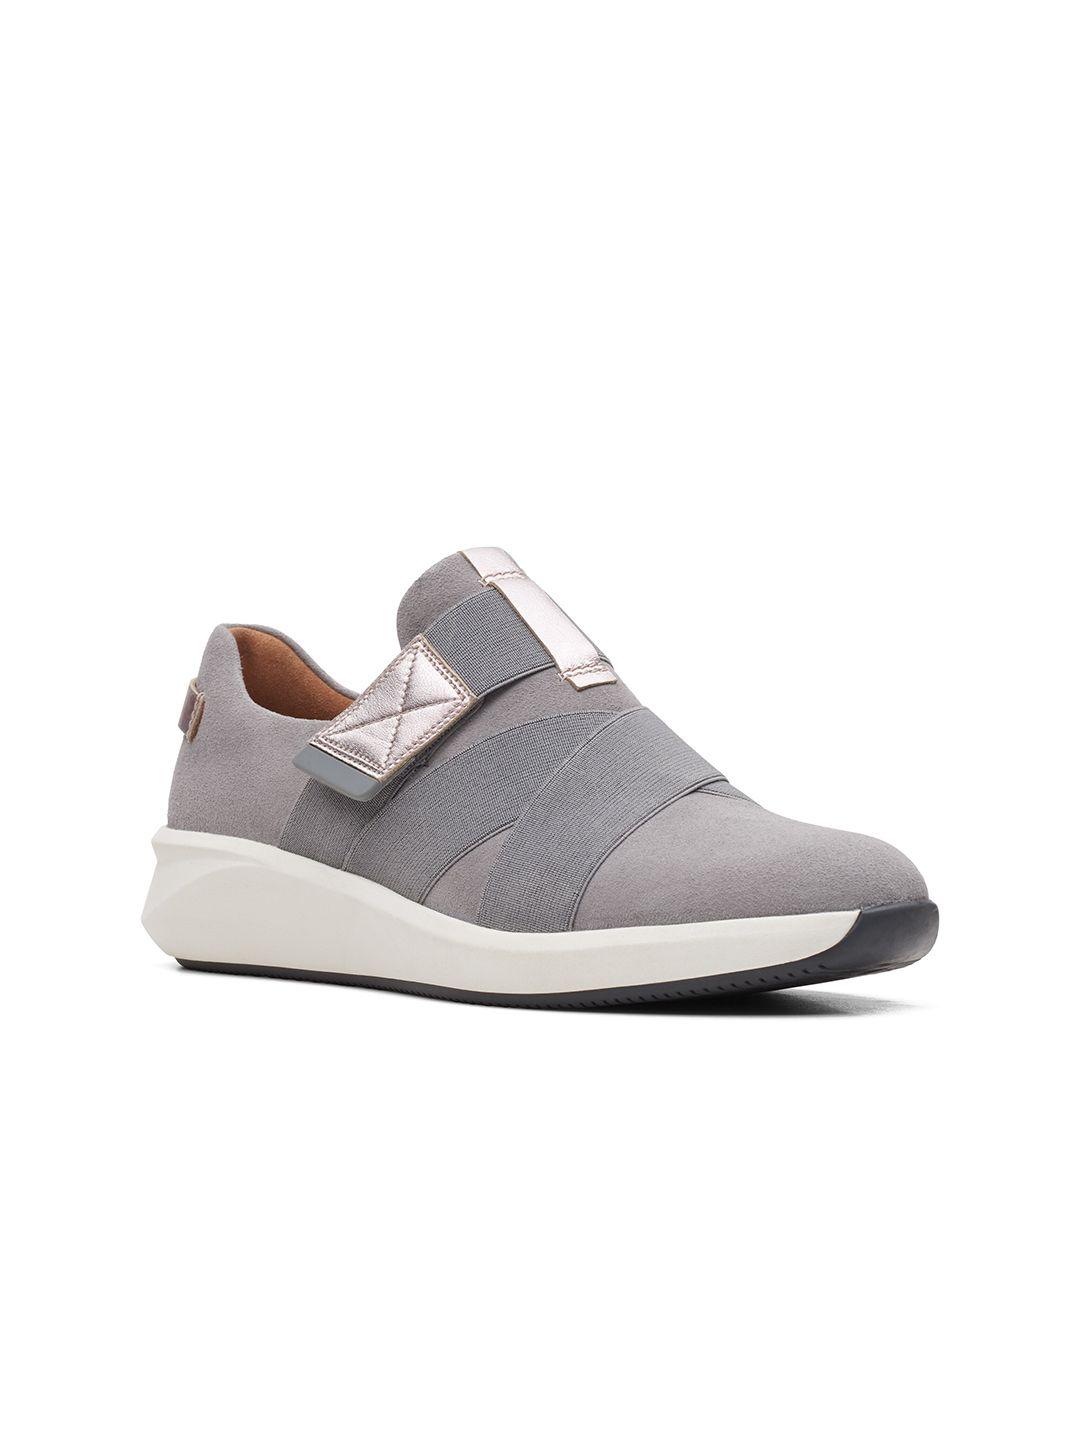 clarks-women-un-rio-strap-leather-running-shoes